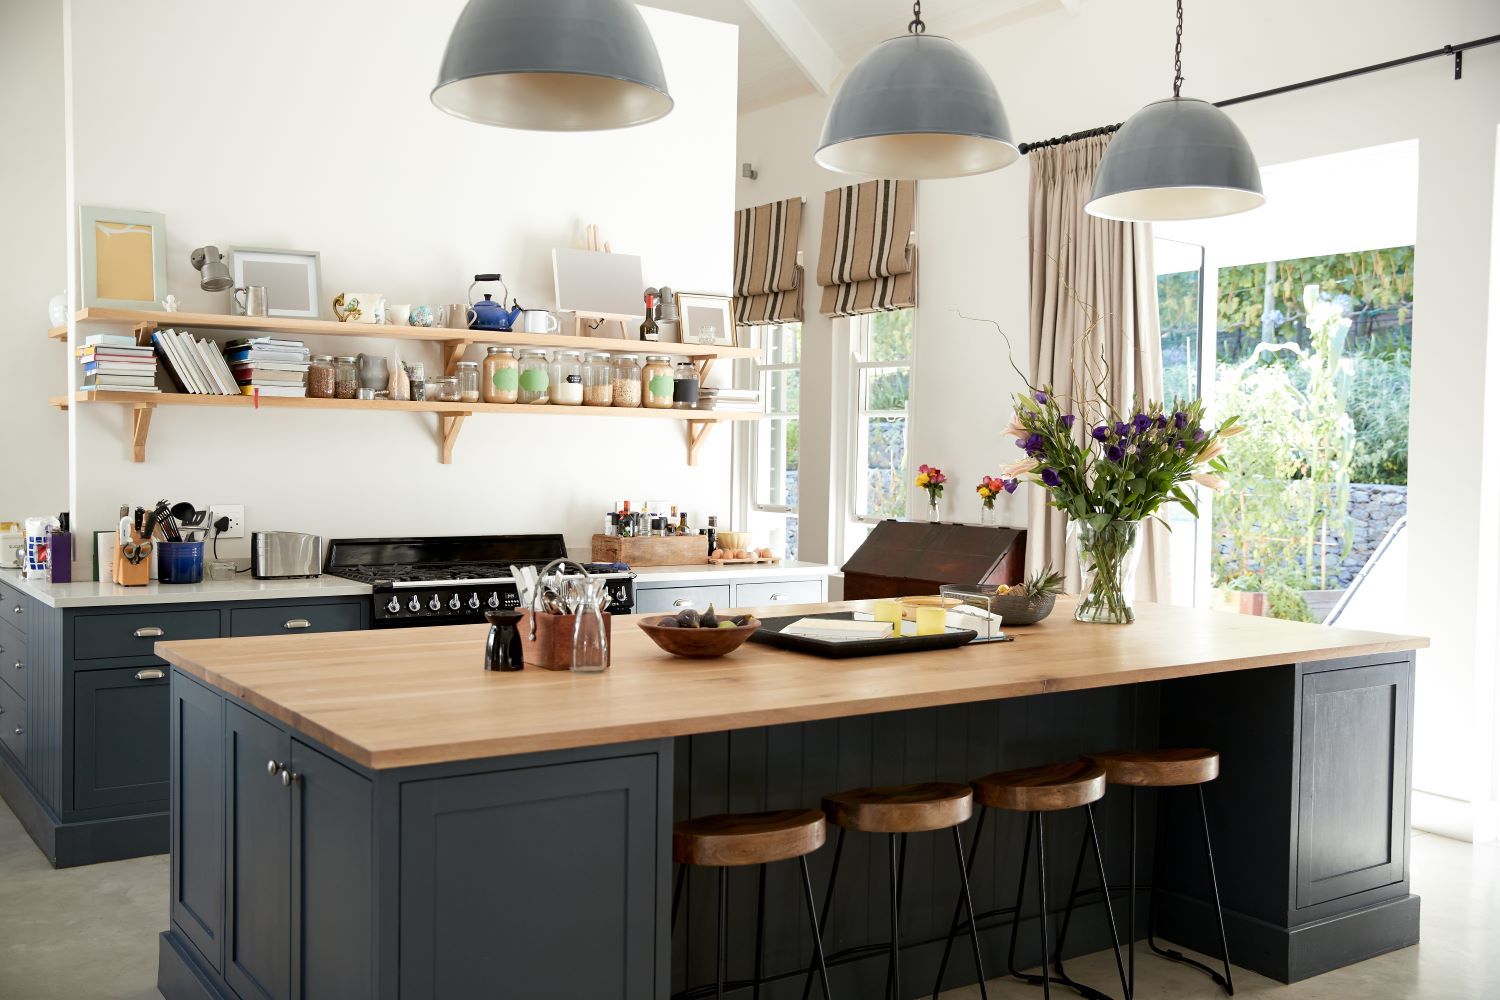 Big Navy Blue Island with 4 stools in a Kitchen